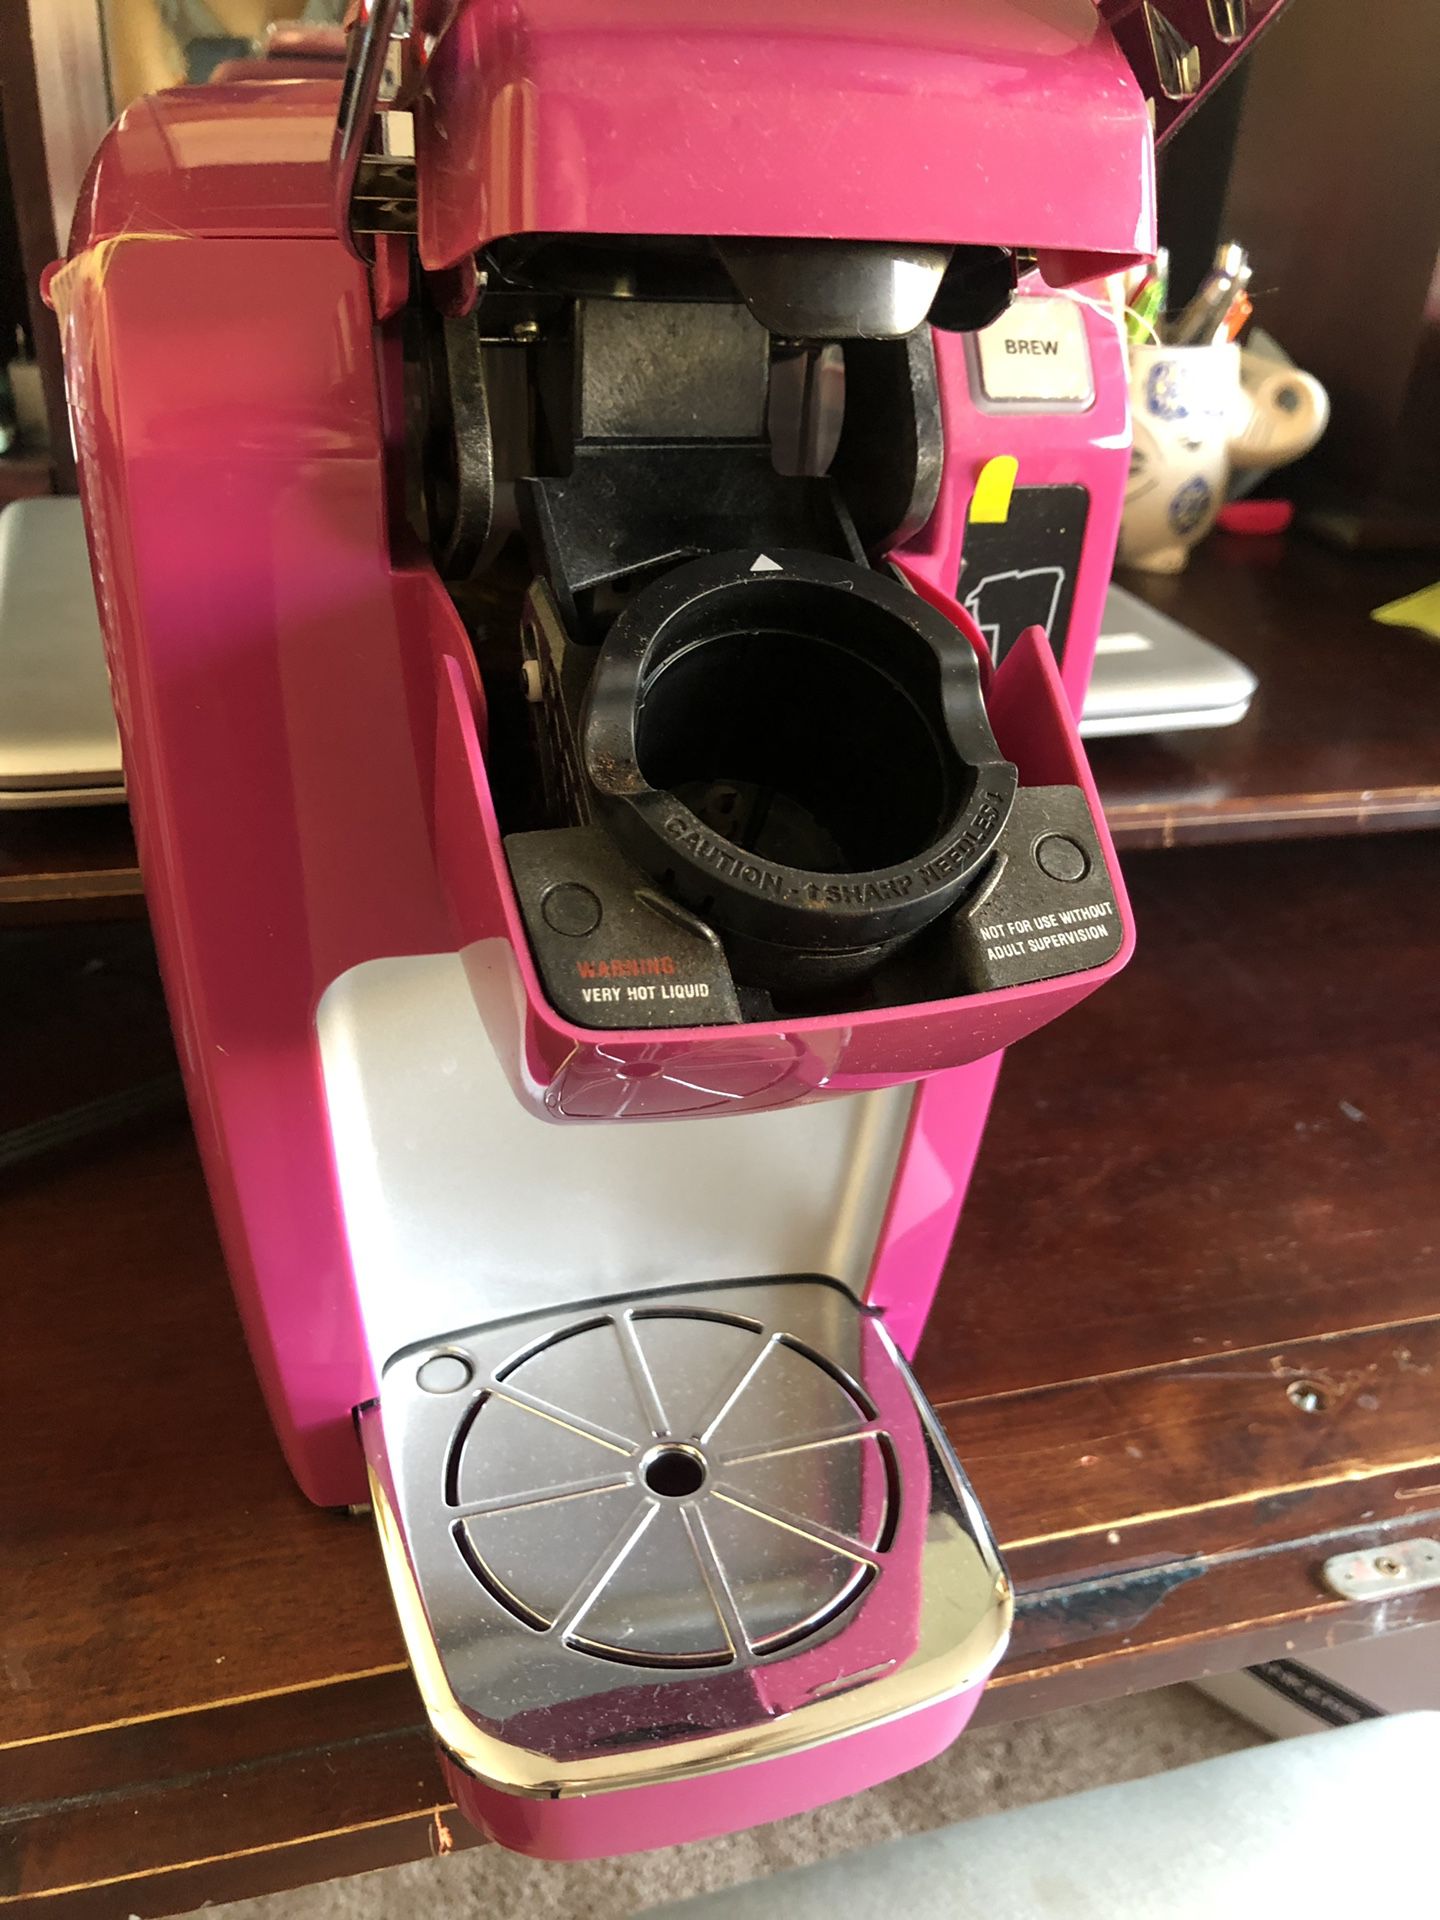 Keurig Duo Coffee Maker for Sale in Moreno Valley, CA - OfferUp